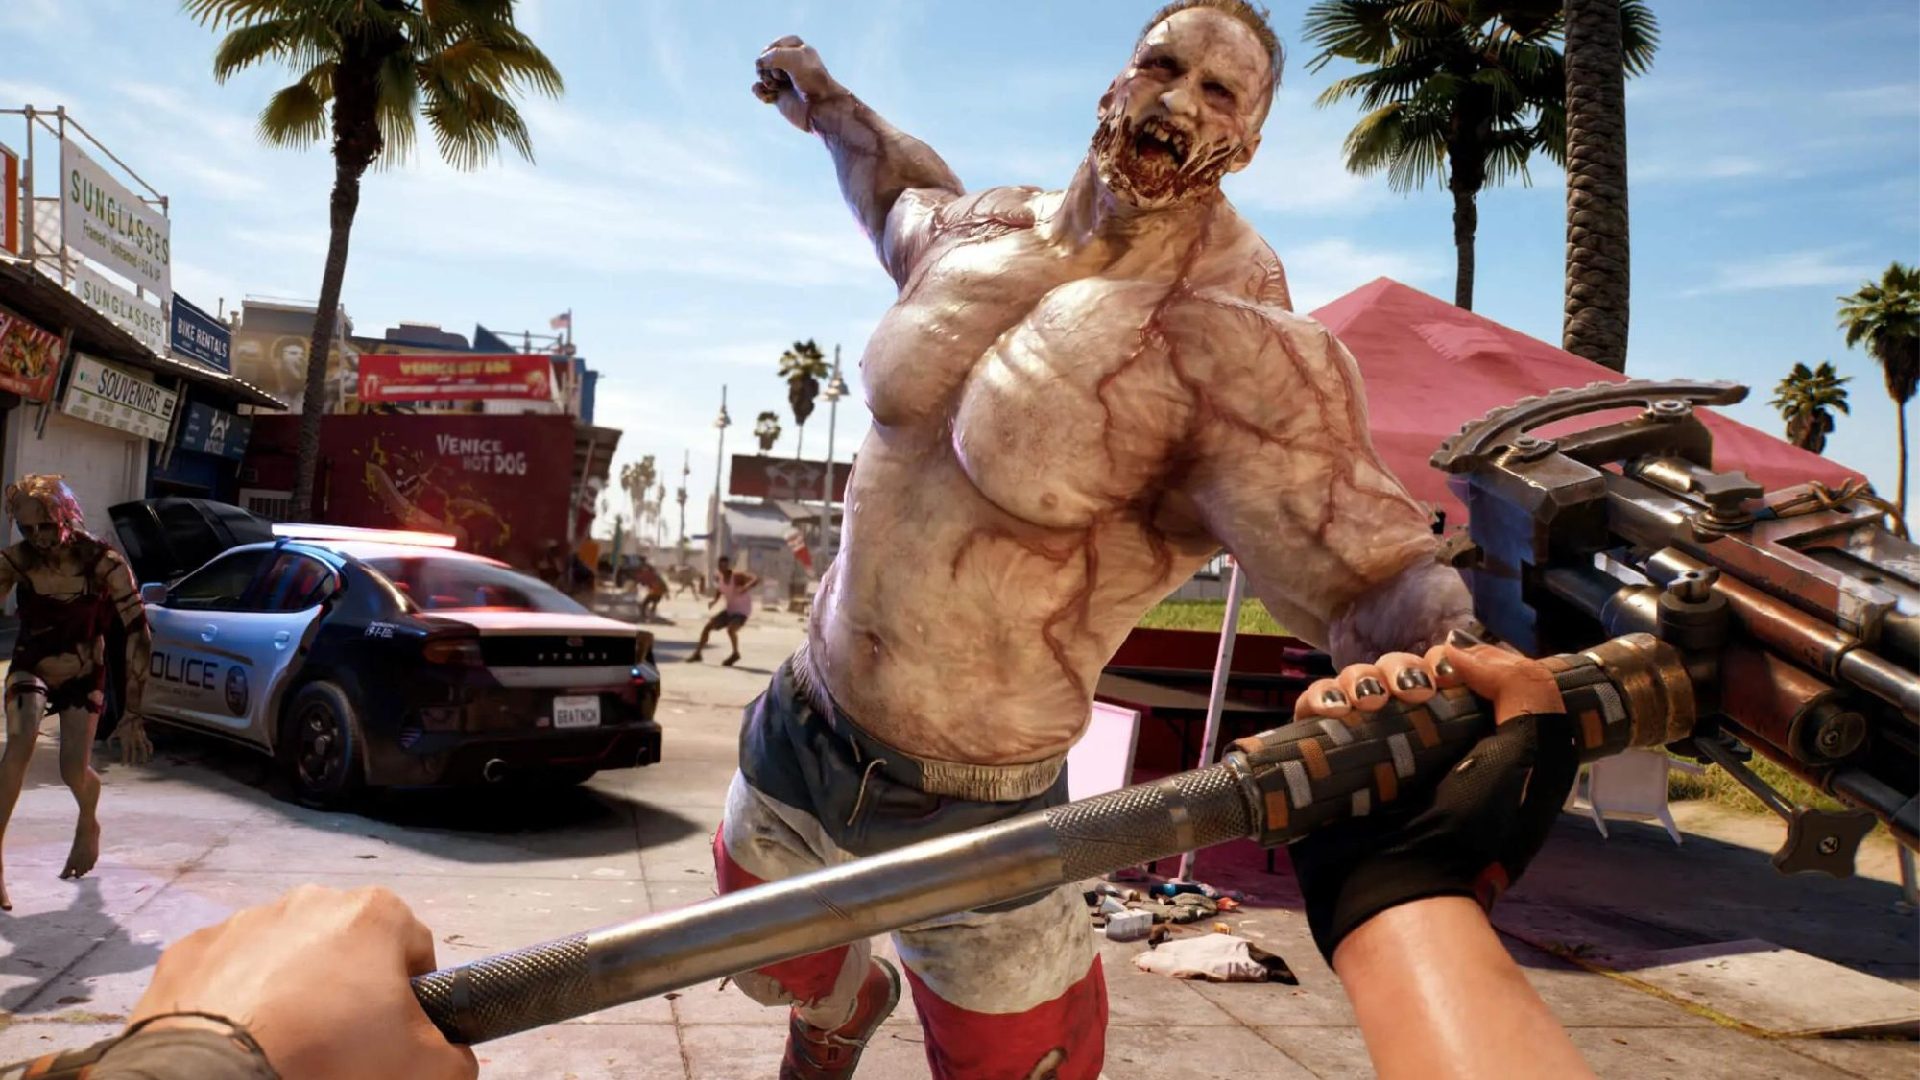 Dead Island 2 weapons: A zombie canbe seen as the player attacks with a hammer